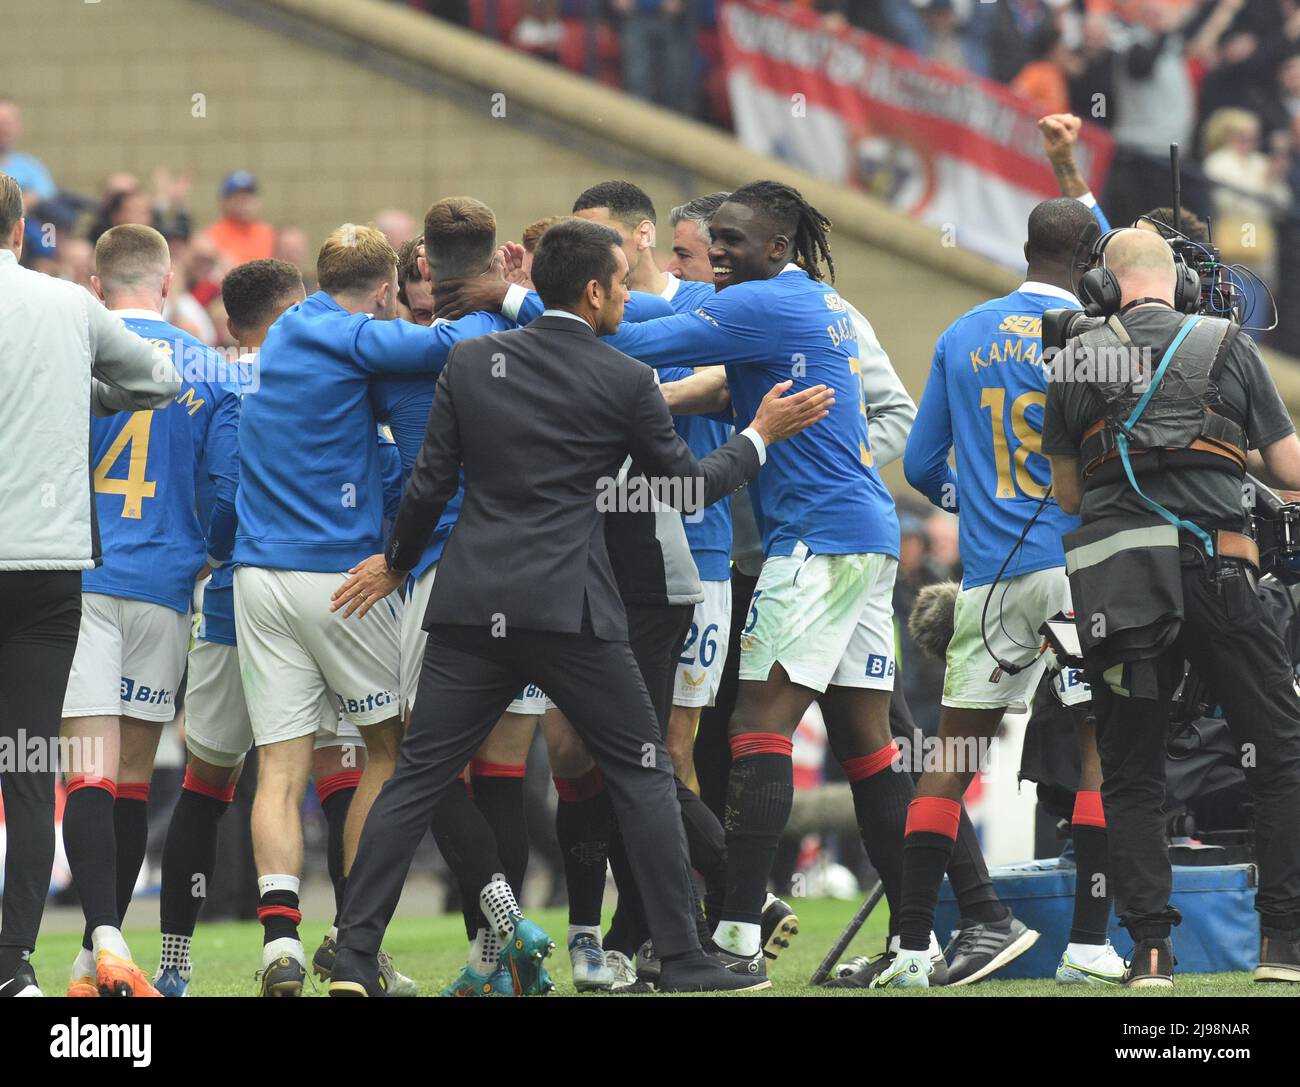 Hampden Park.Glasgow.Scotland, UK. 21st May, 2022. Rangers vs Heart of Midlothian. Scottish Cup Final 2022 Giovanni van Bronckhorst, manager of Rangers FC joins in the celebrations after 2nd goal Credit: eric mccowat/Alamy Live News Stock Photo